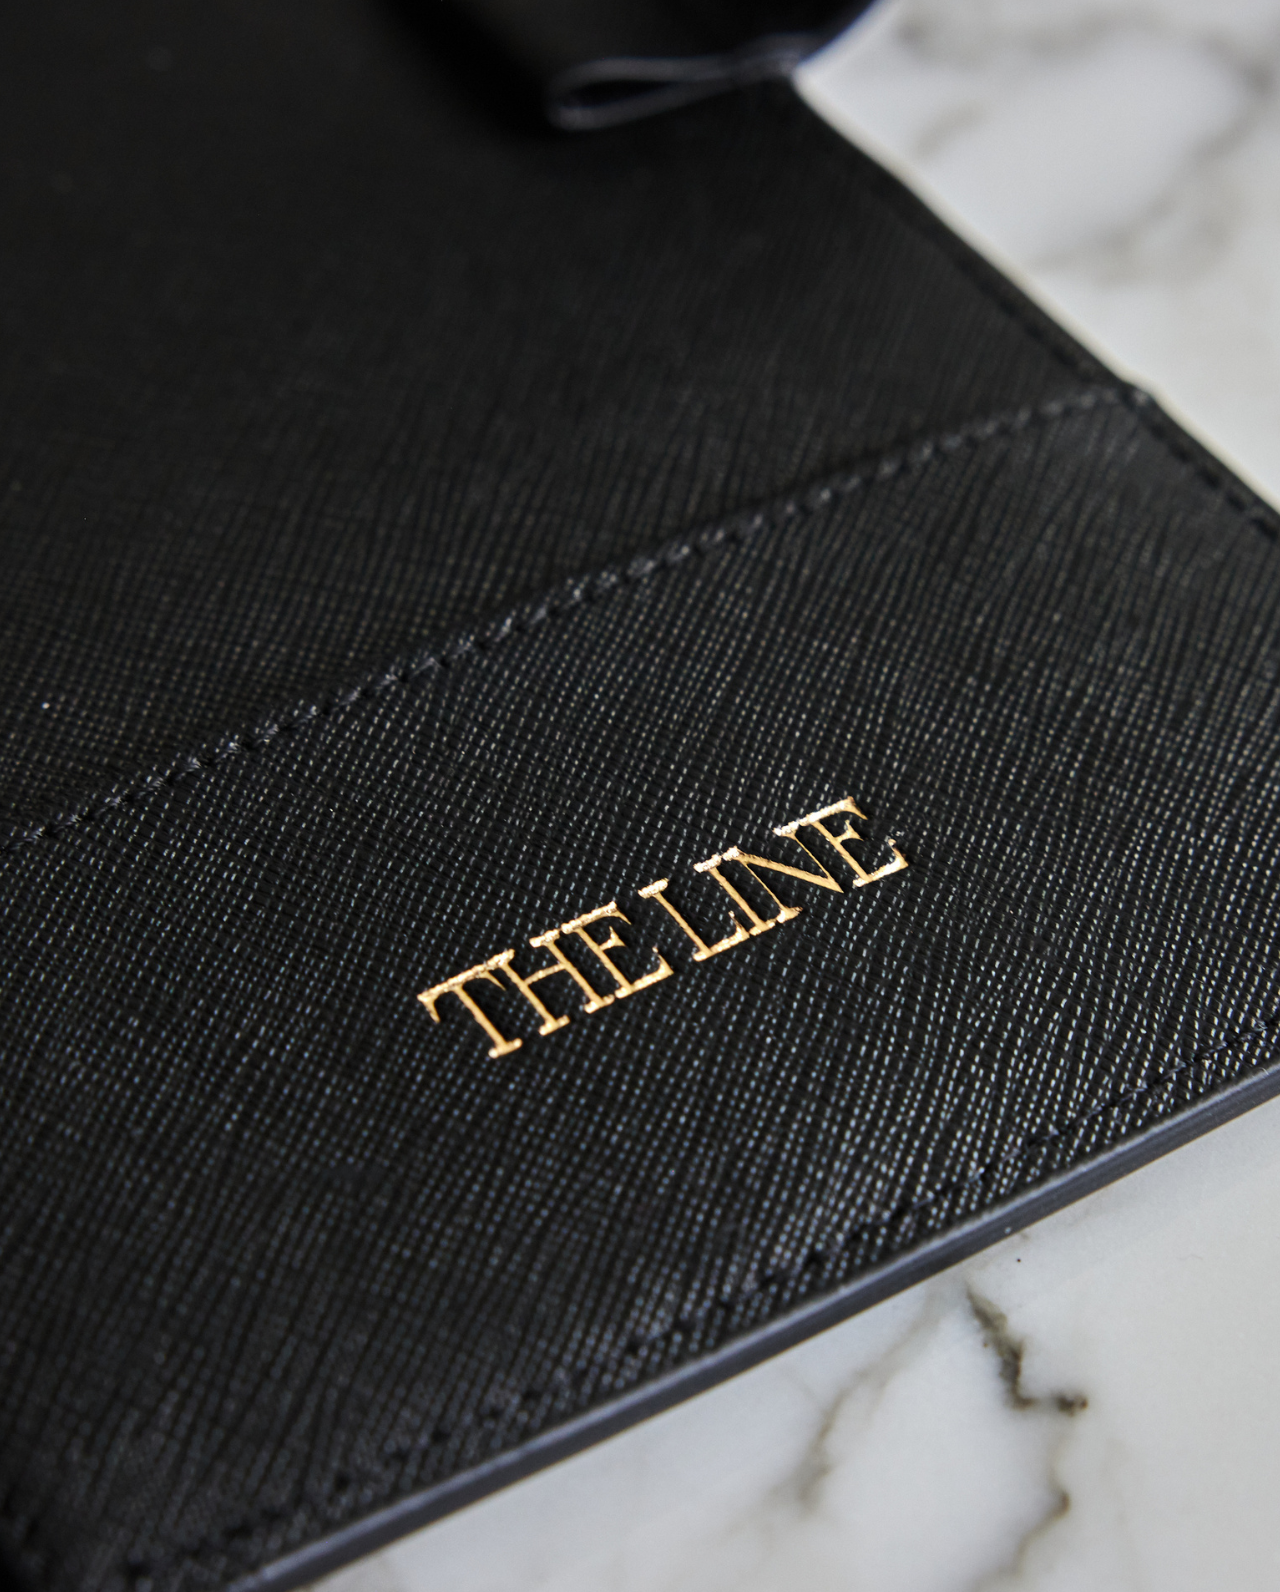 The Leather Agenda | A5 size (6-Ring Planner)